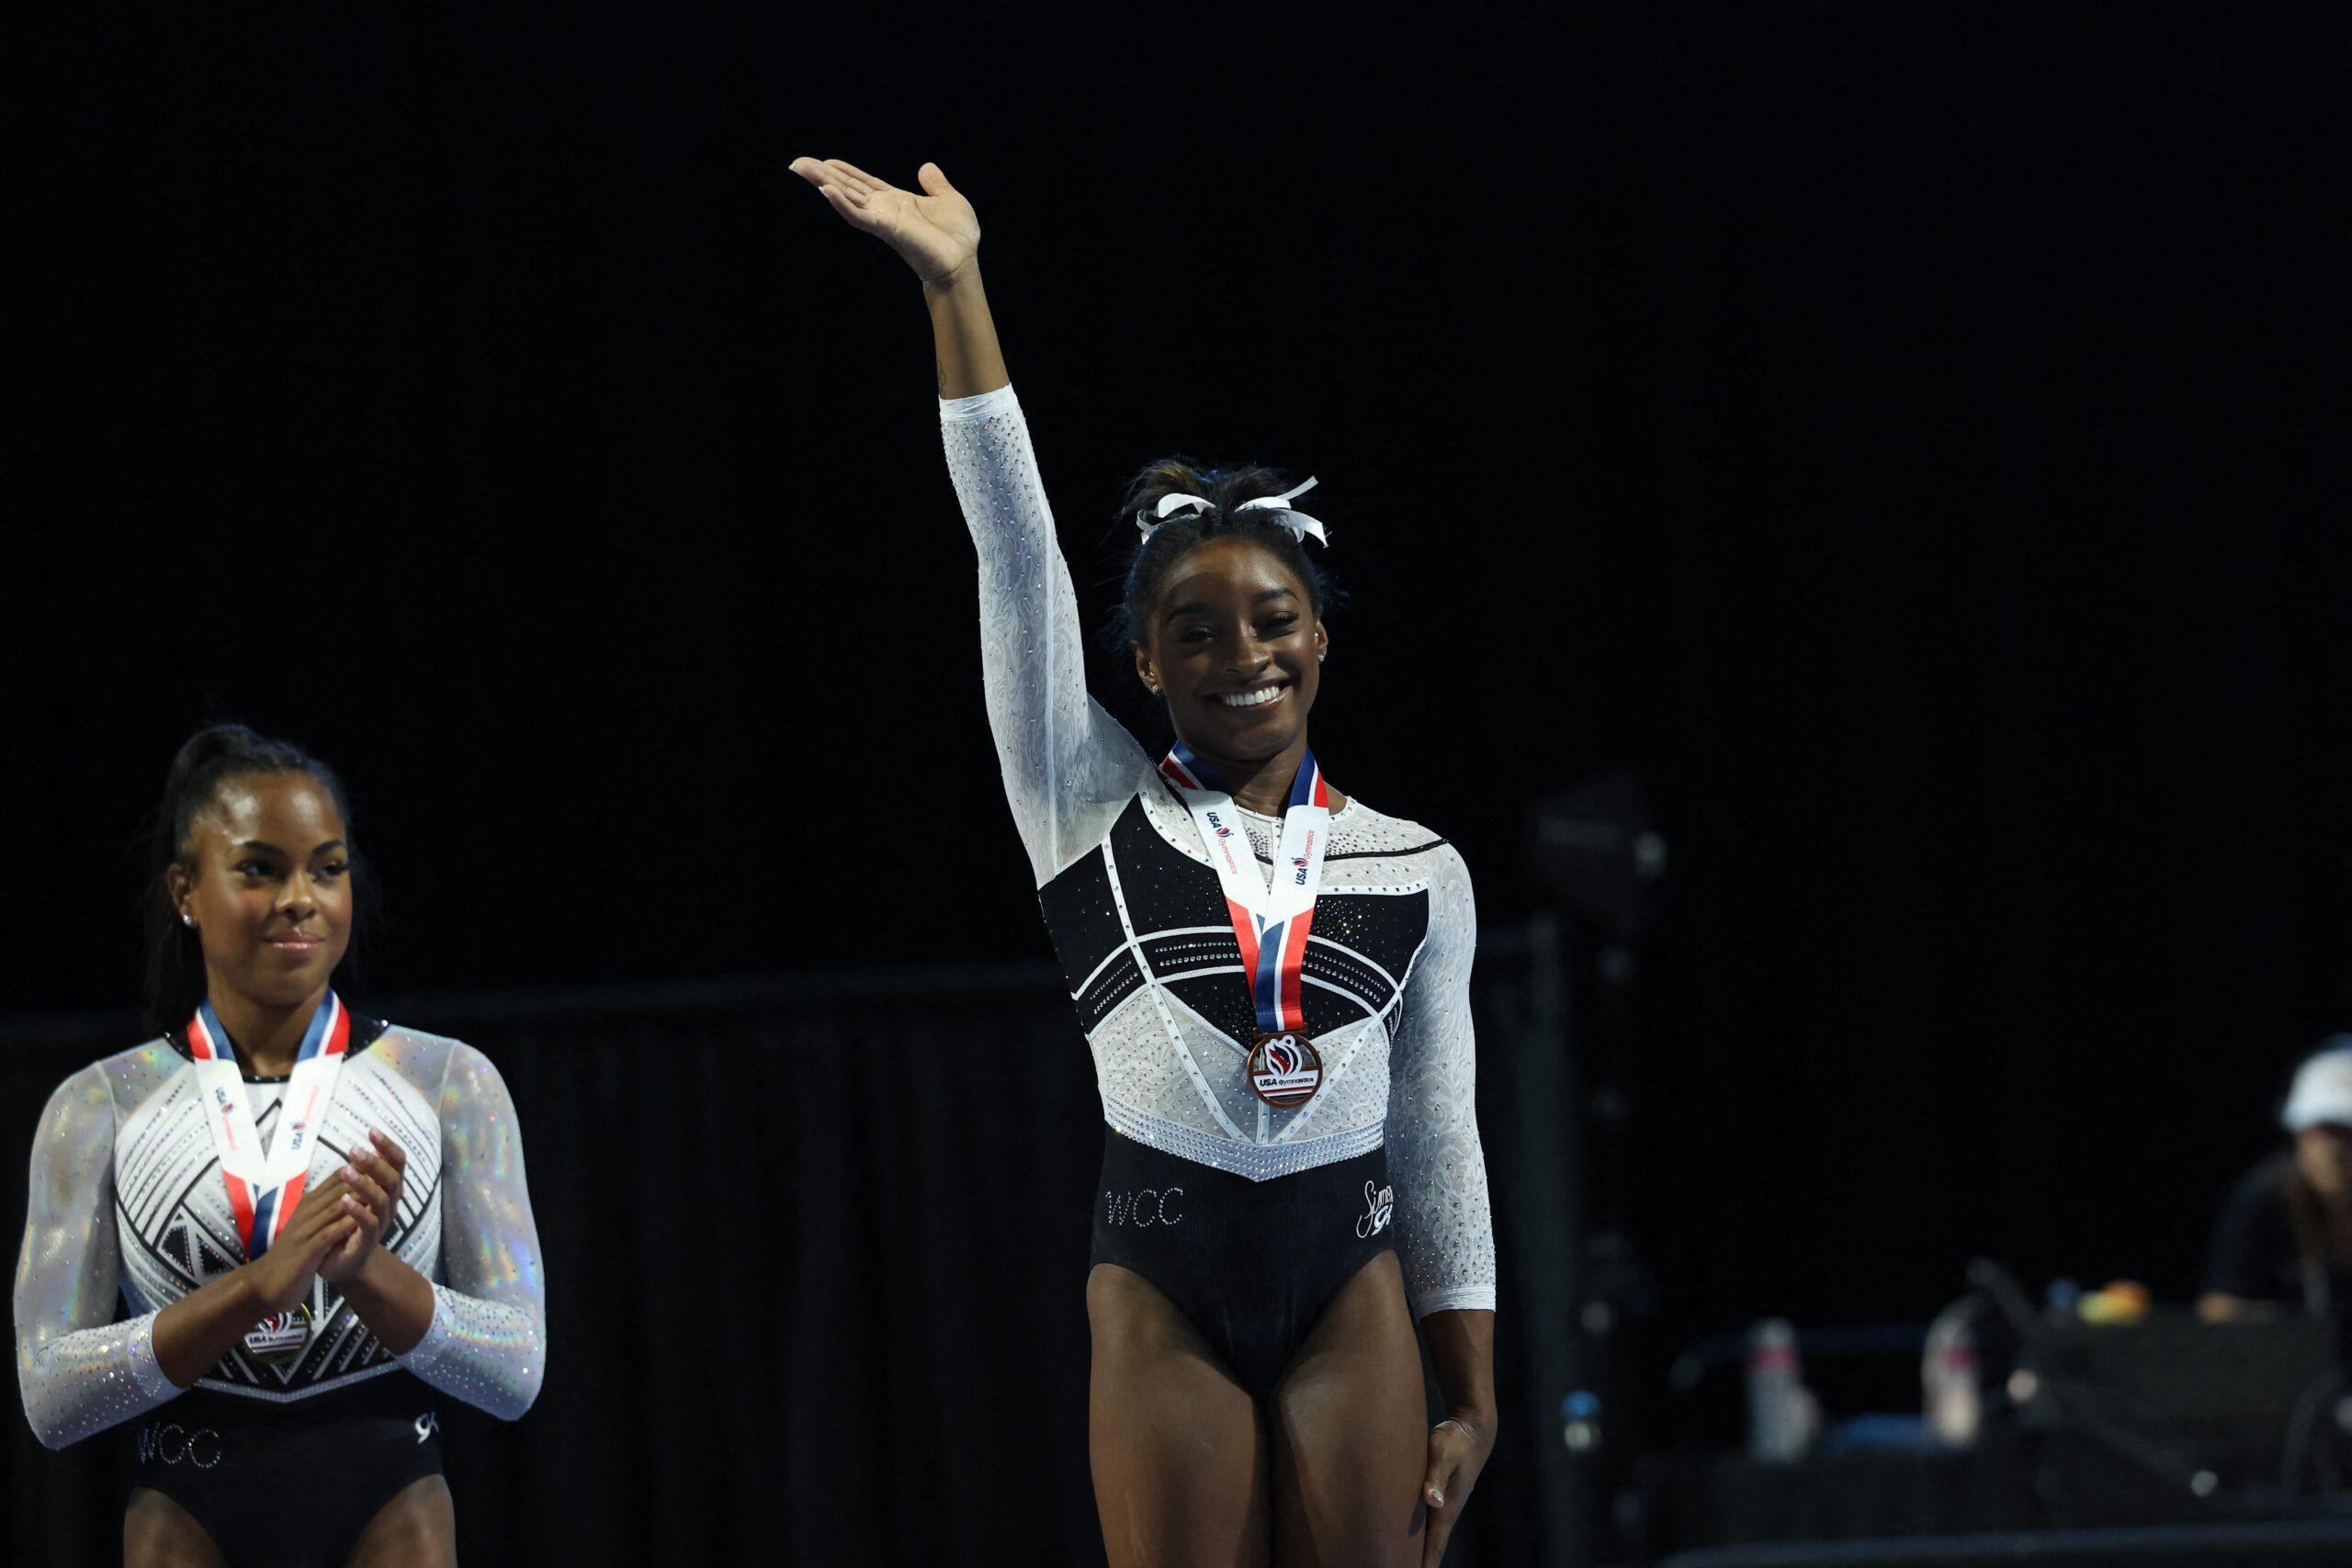 Simone Biles Thought The World 'Hated' Her And Would Be 'Banned From America'